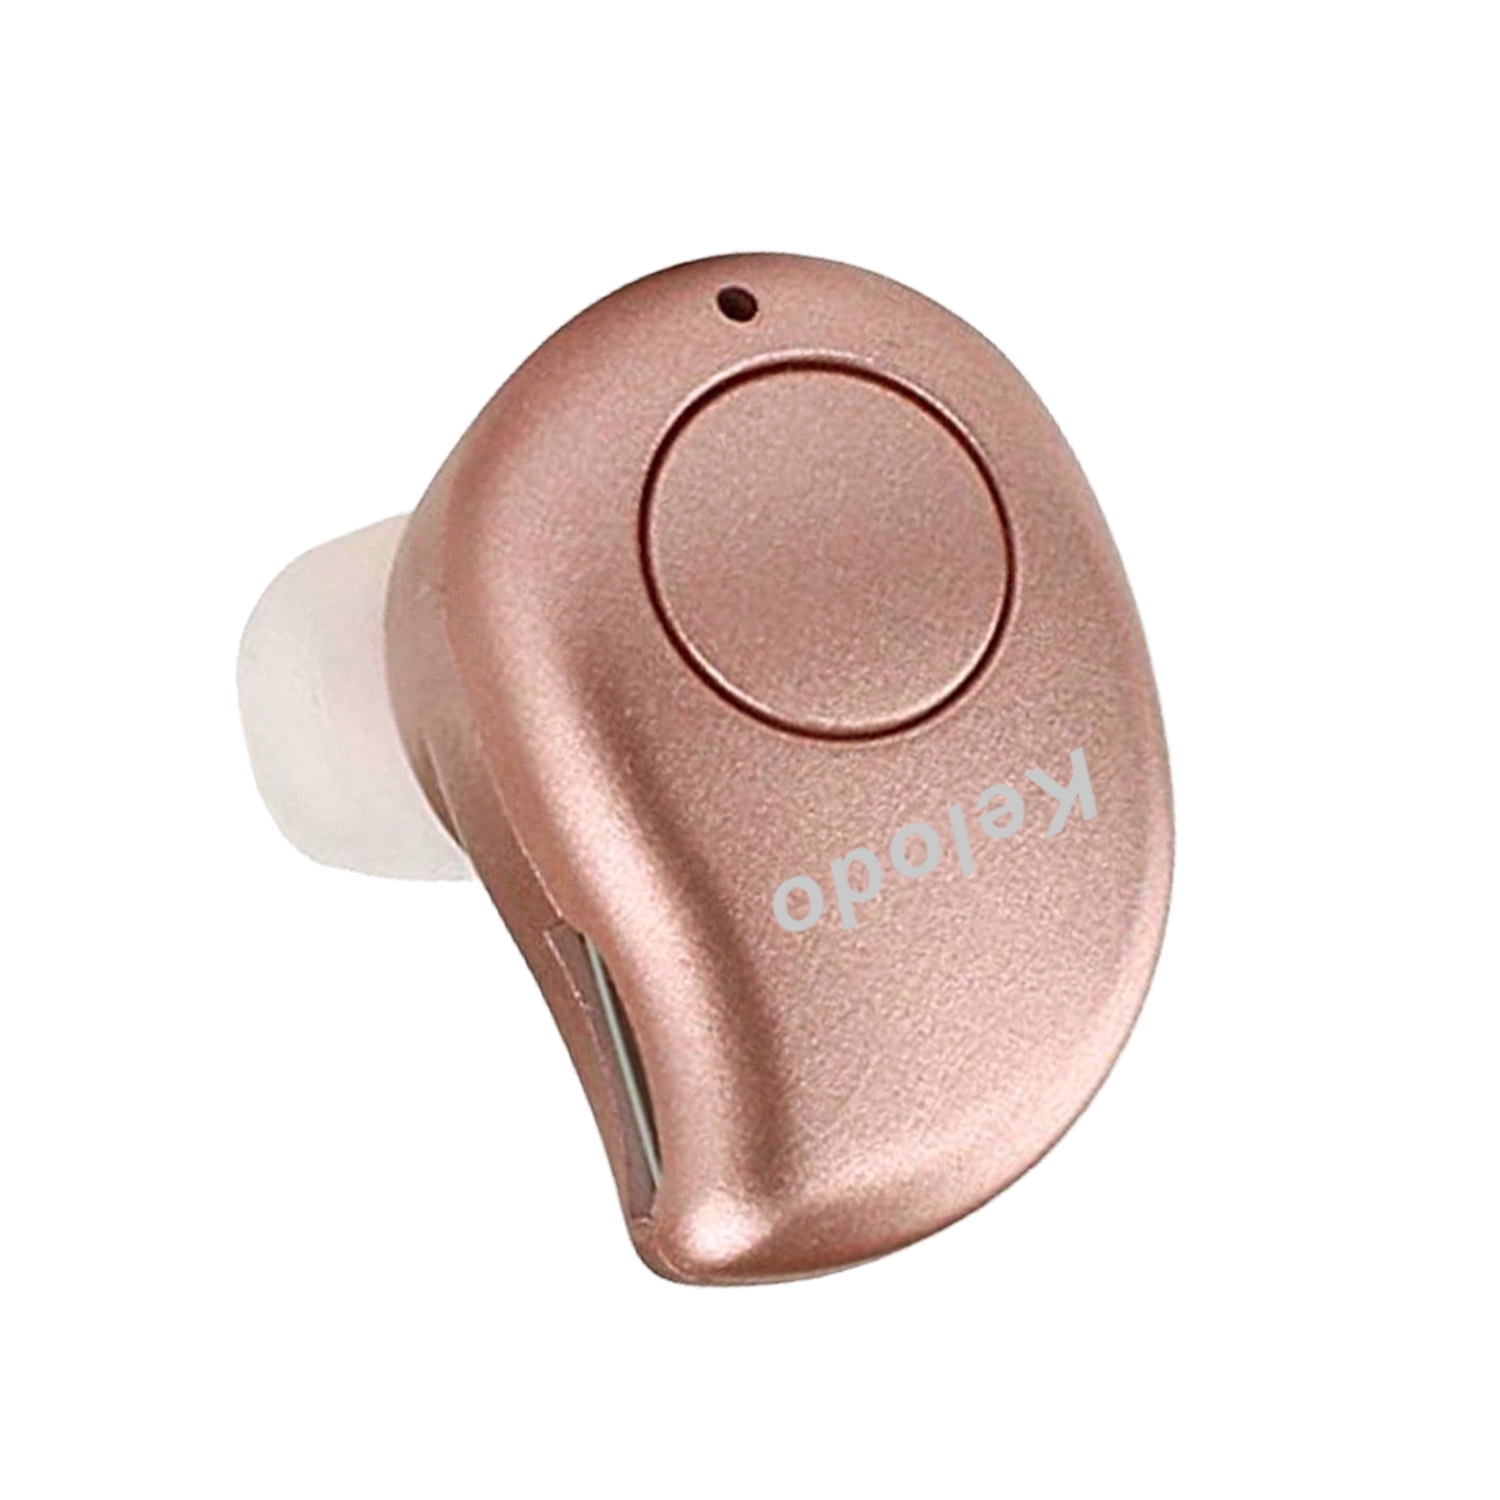 Aanleg stapel Milieuvriendelijk kelodo Bluetooth Earbud S530 Plus Mini Wireless Earphone In Ear Small  Headset with Mic Invisible V4.1 Earpiece Hands-free Noise Canceling for  Apple iPhone and Android Smartphones - Rose Gold - Walmart.com